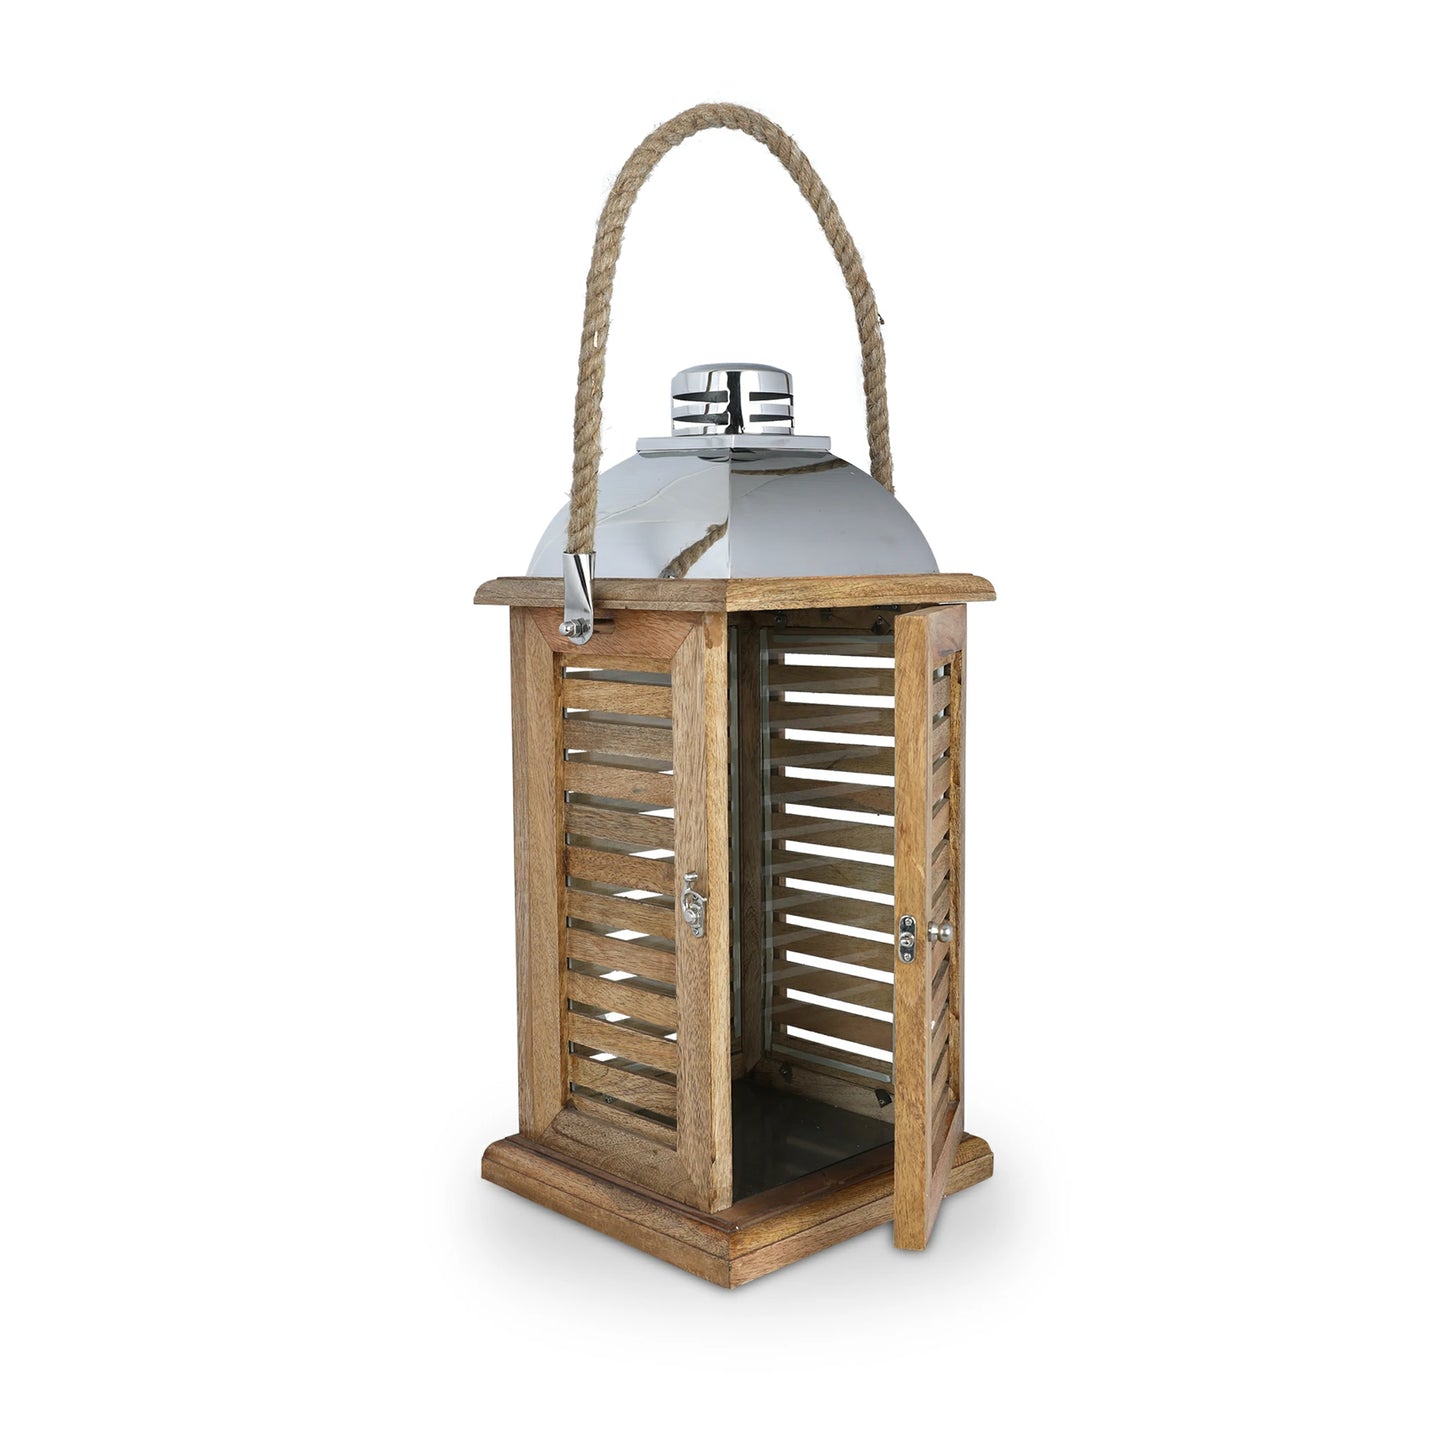 Wooden Framed Shutter Style Large Candle Floor Lantern with Roped Handles